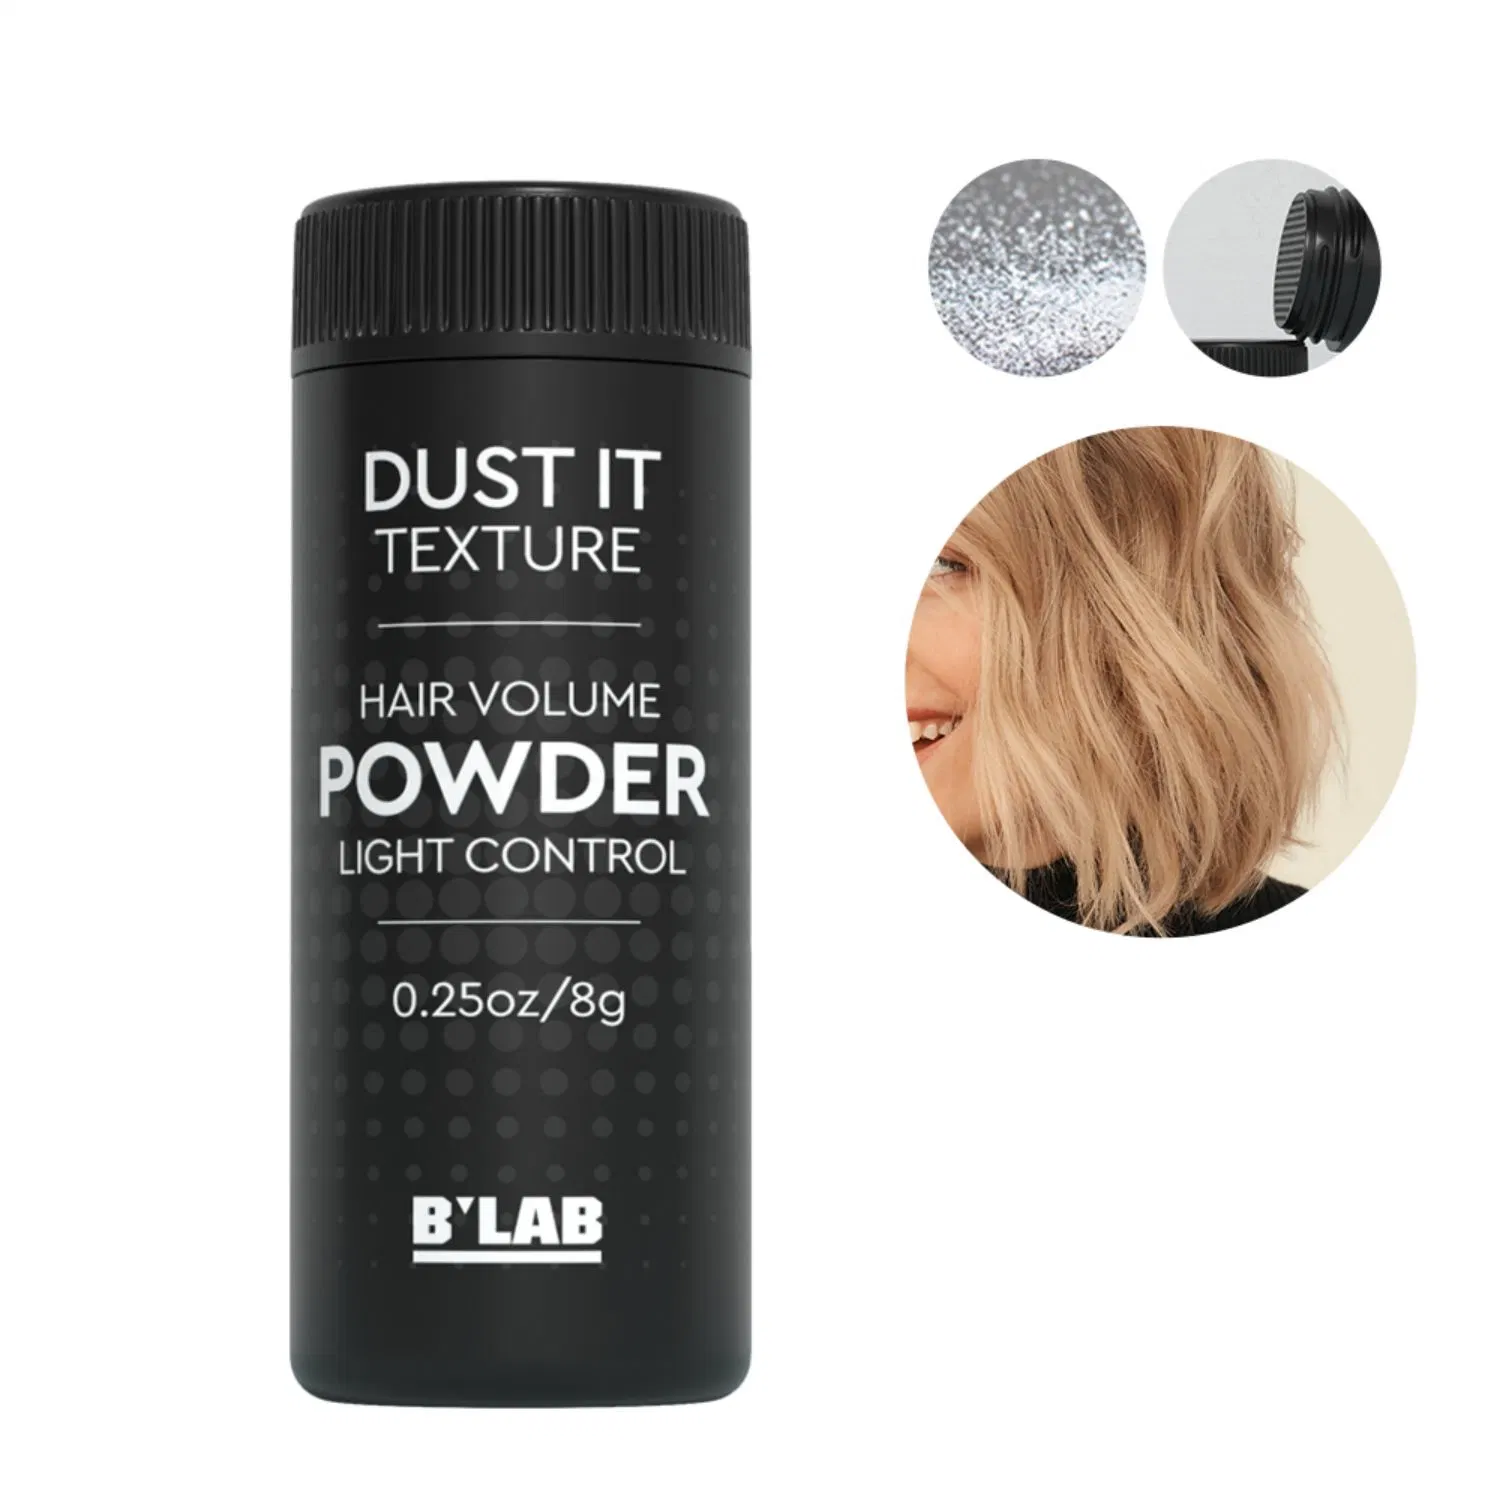 Wholesale OEM/ODM Beauty Products Hair Styling Powder Texture Volume Powder Style Hair Volumizing Powder with Good Price